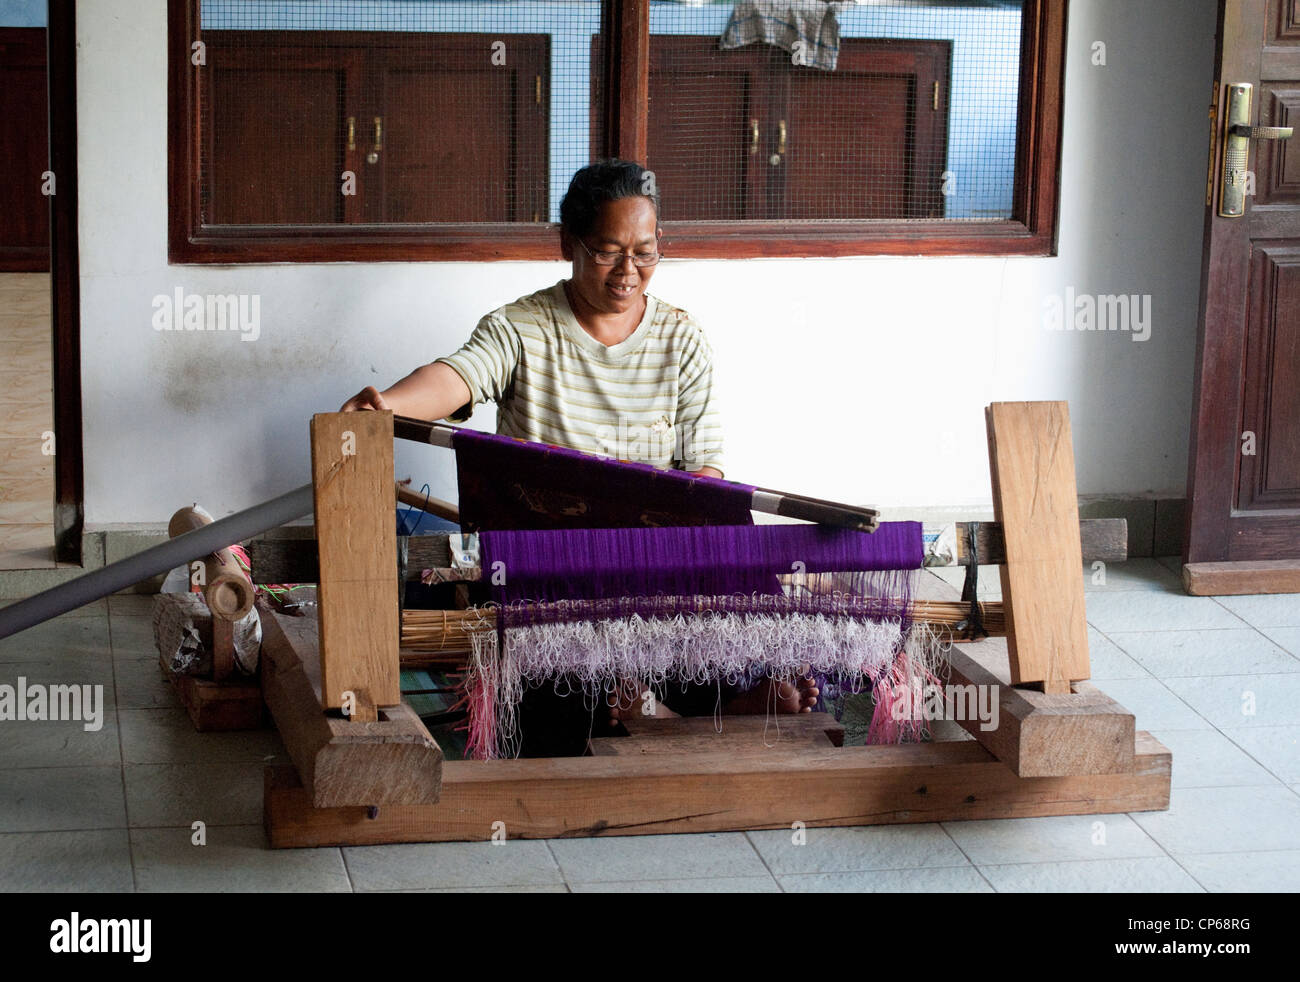 A Balinese woman weaves songket, a type of fabric that has gold an/or silver threads running through the piece on a hand loom. Stock Photo